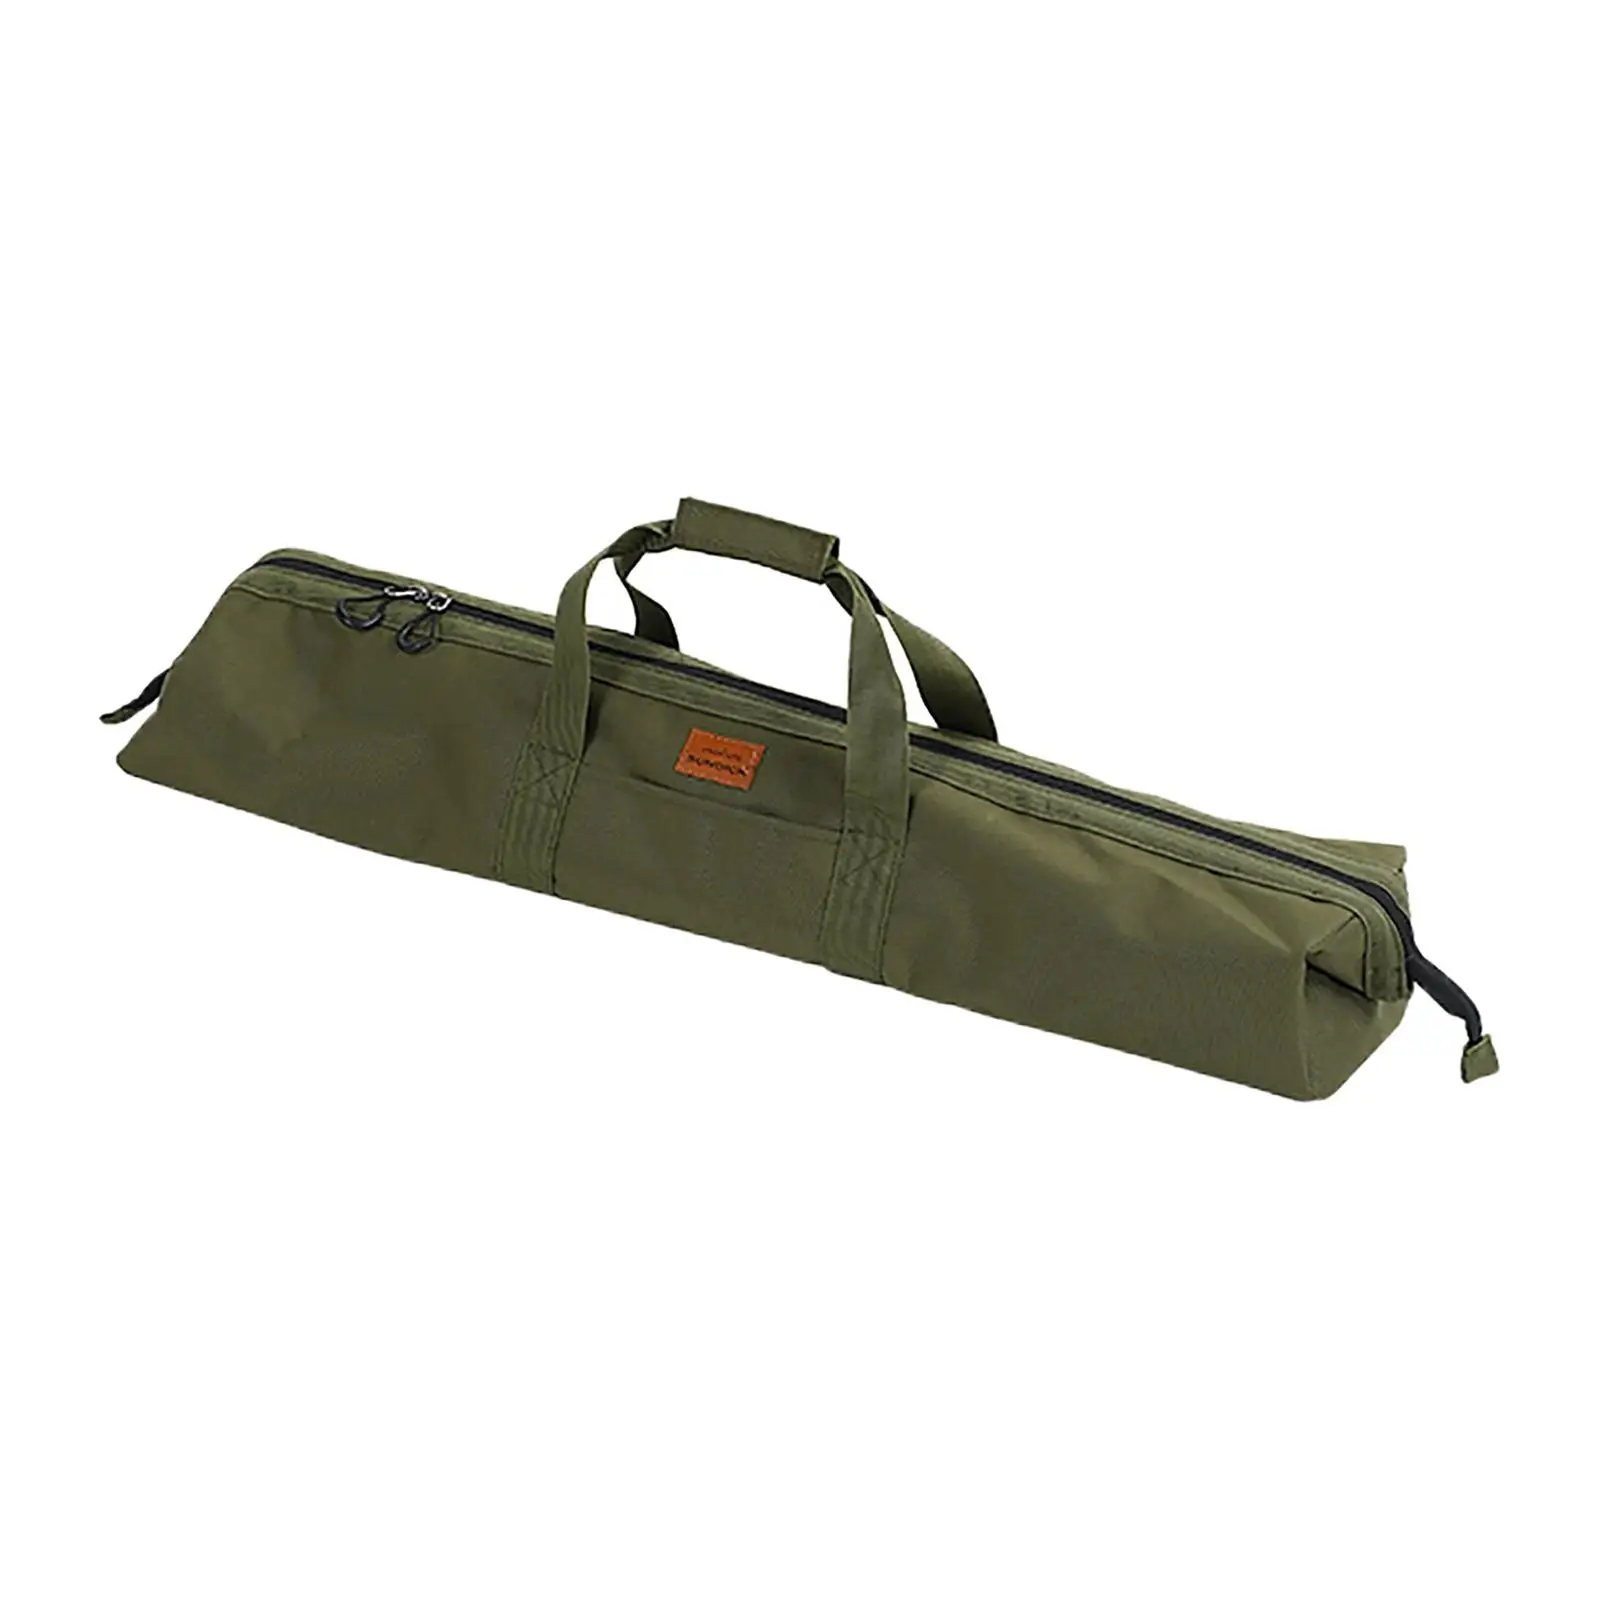 Canopy Pole Storage Bag Wear-Resistant Carrying Case for Camping Accessories